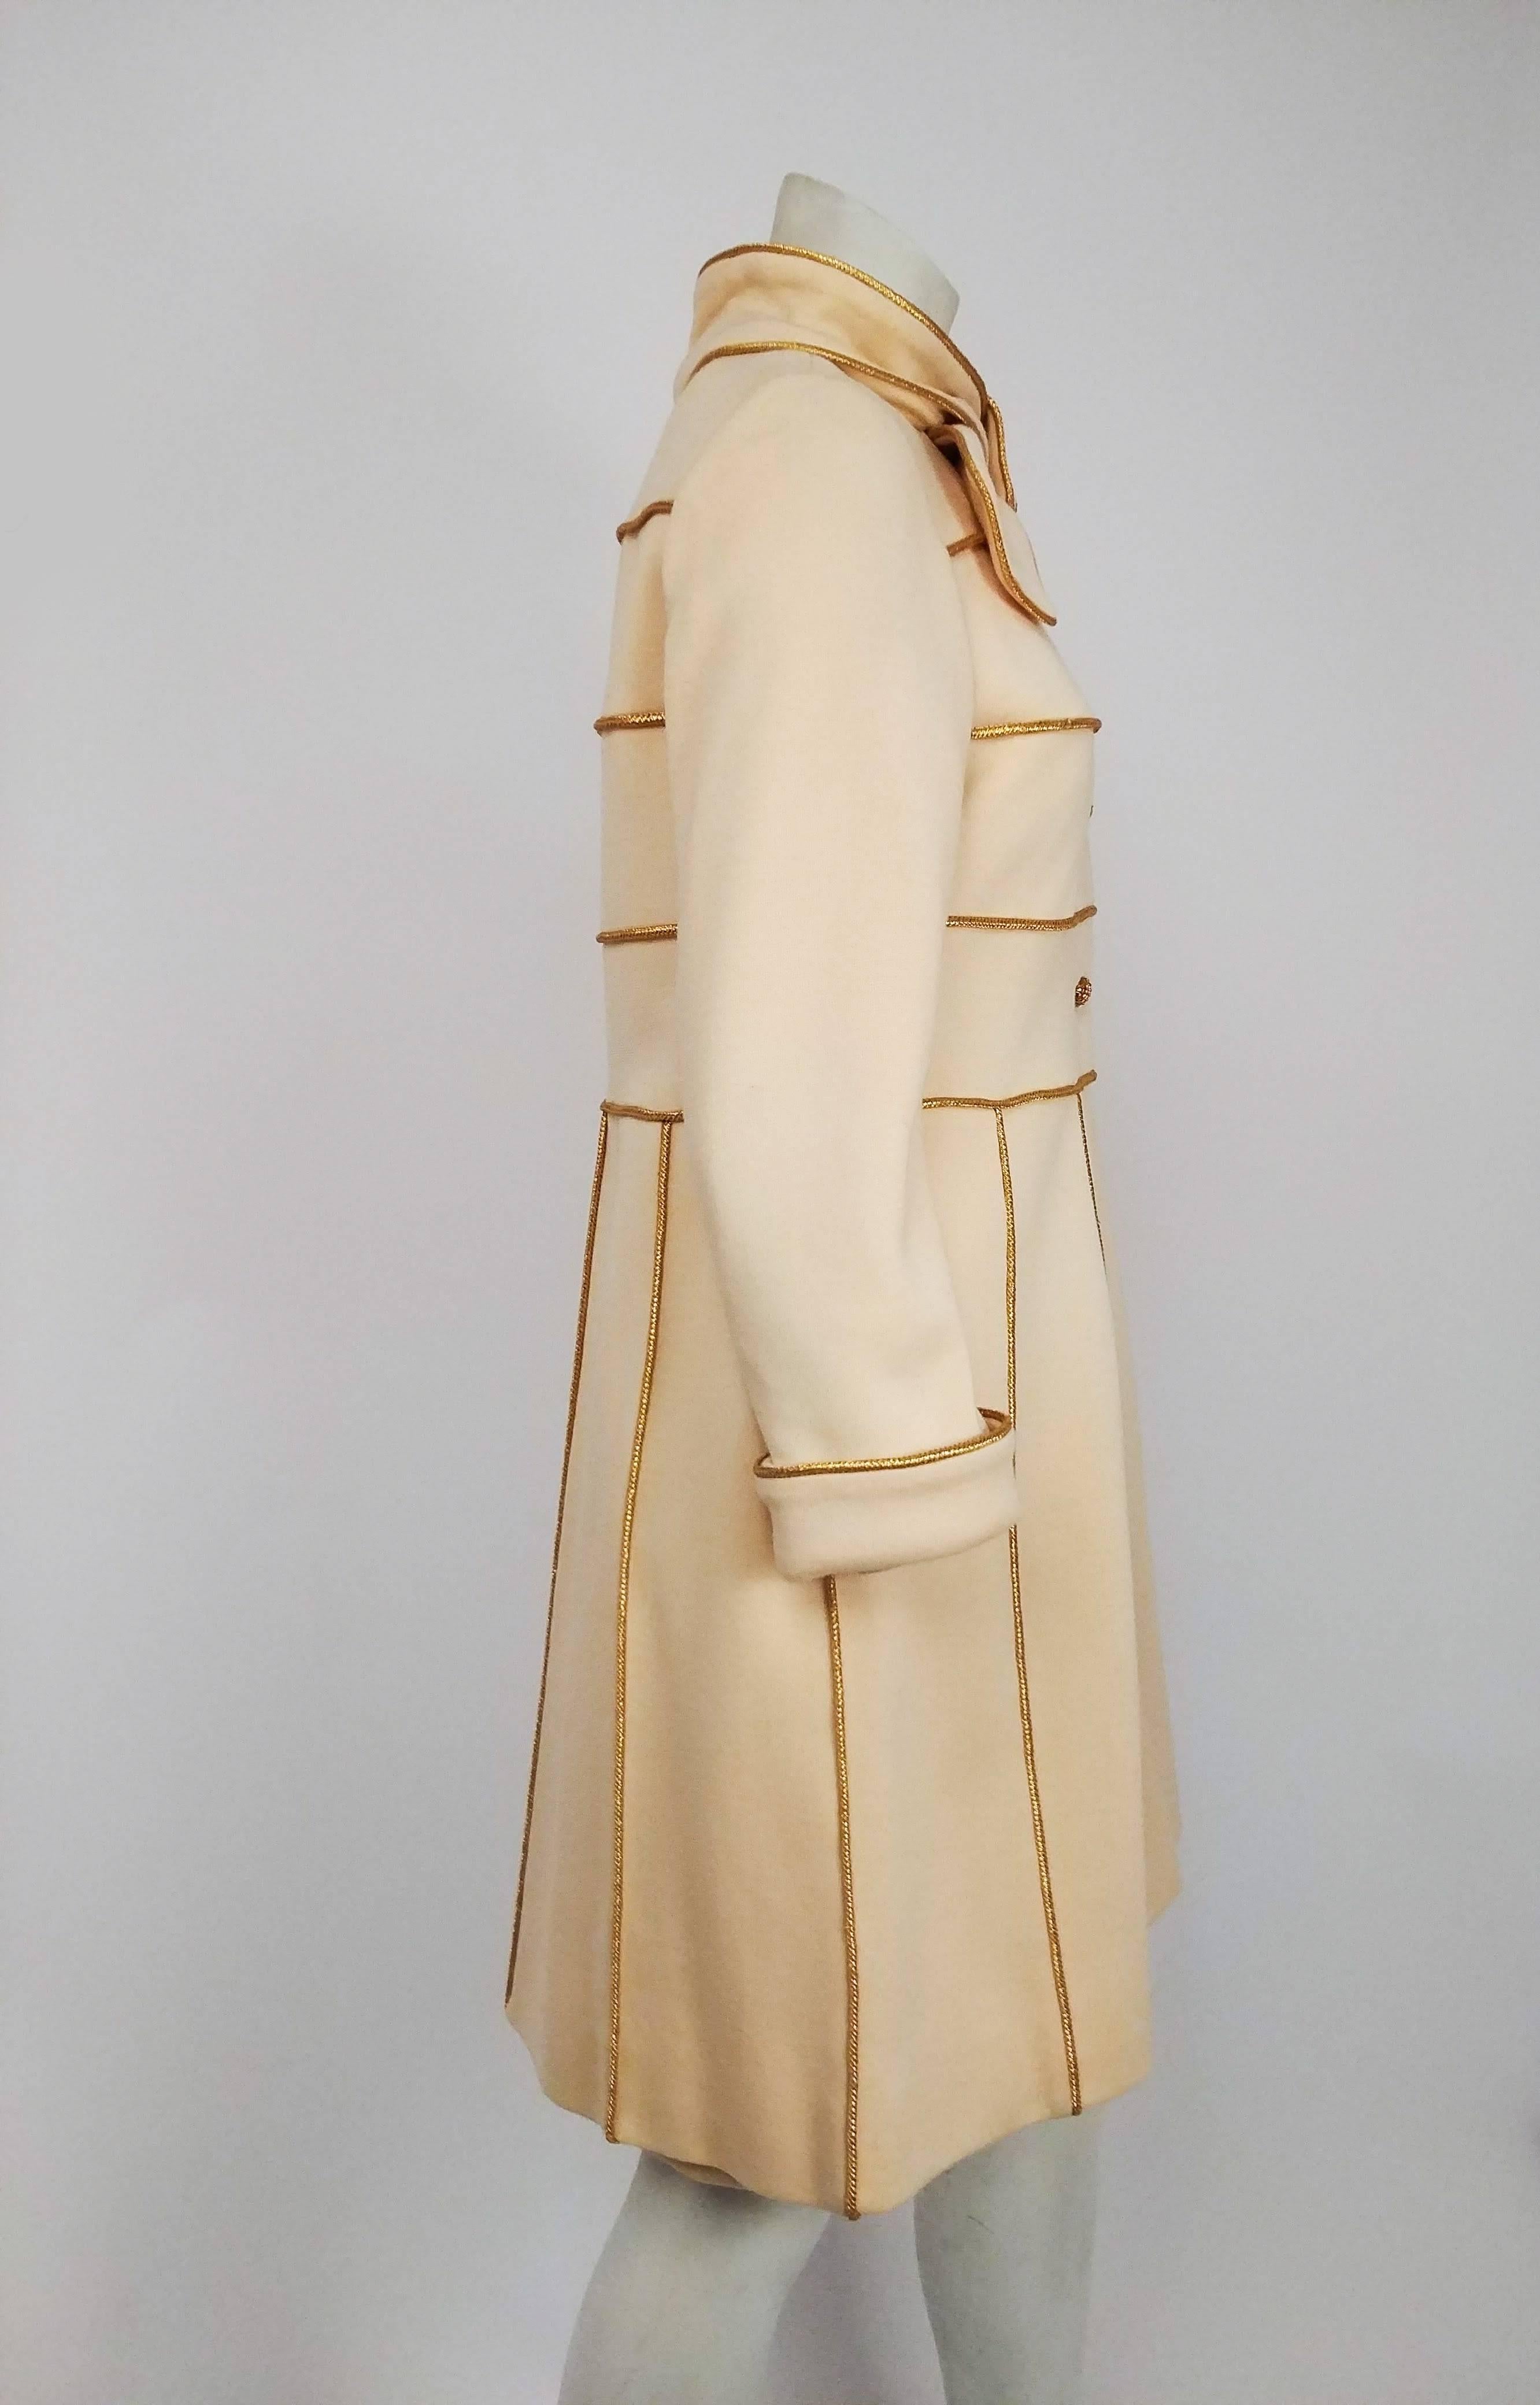 1960s Lilli Ann Knit Gold & Cream Dress & Coat Set. Cream knit fabric with metallic gold piping. Wrap-around tie collar fastens in place with a snap to look like a bow at neck, pleated skirt of coat with embellished with gold piping. Sheath dress